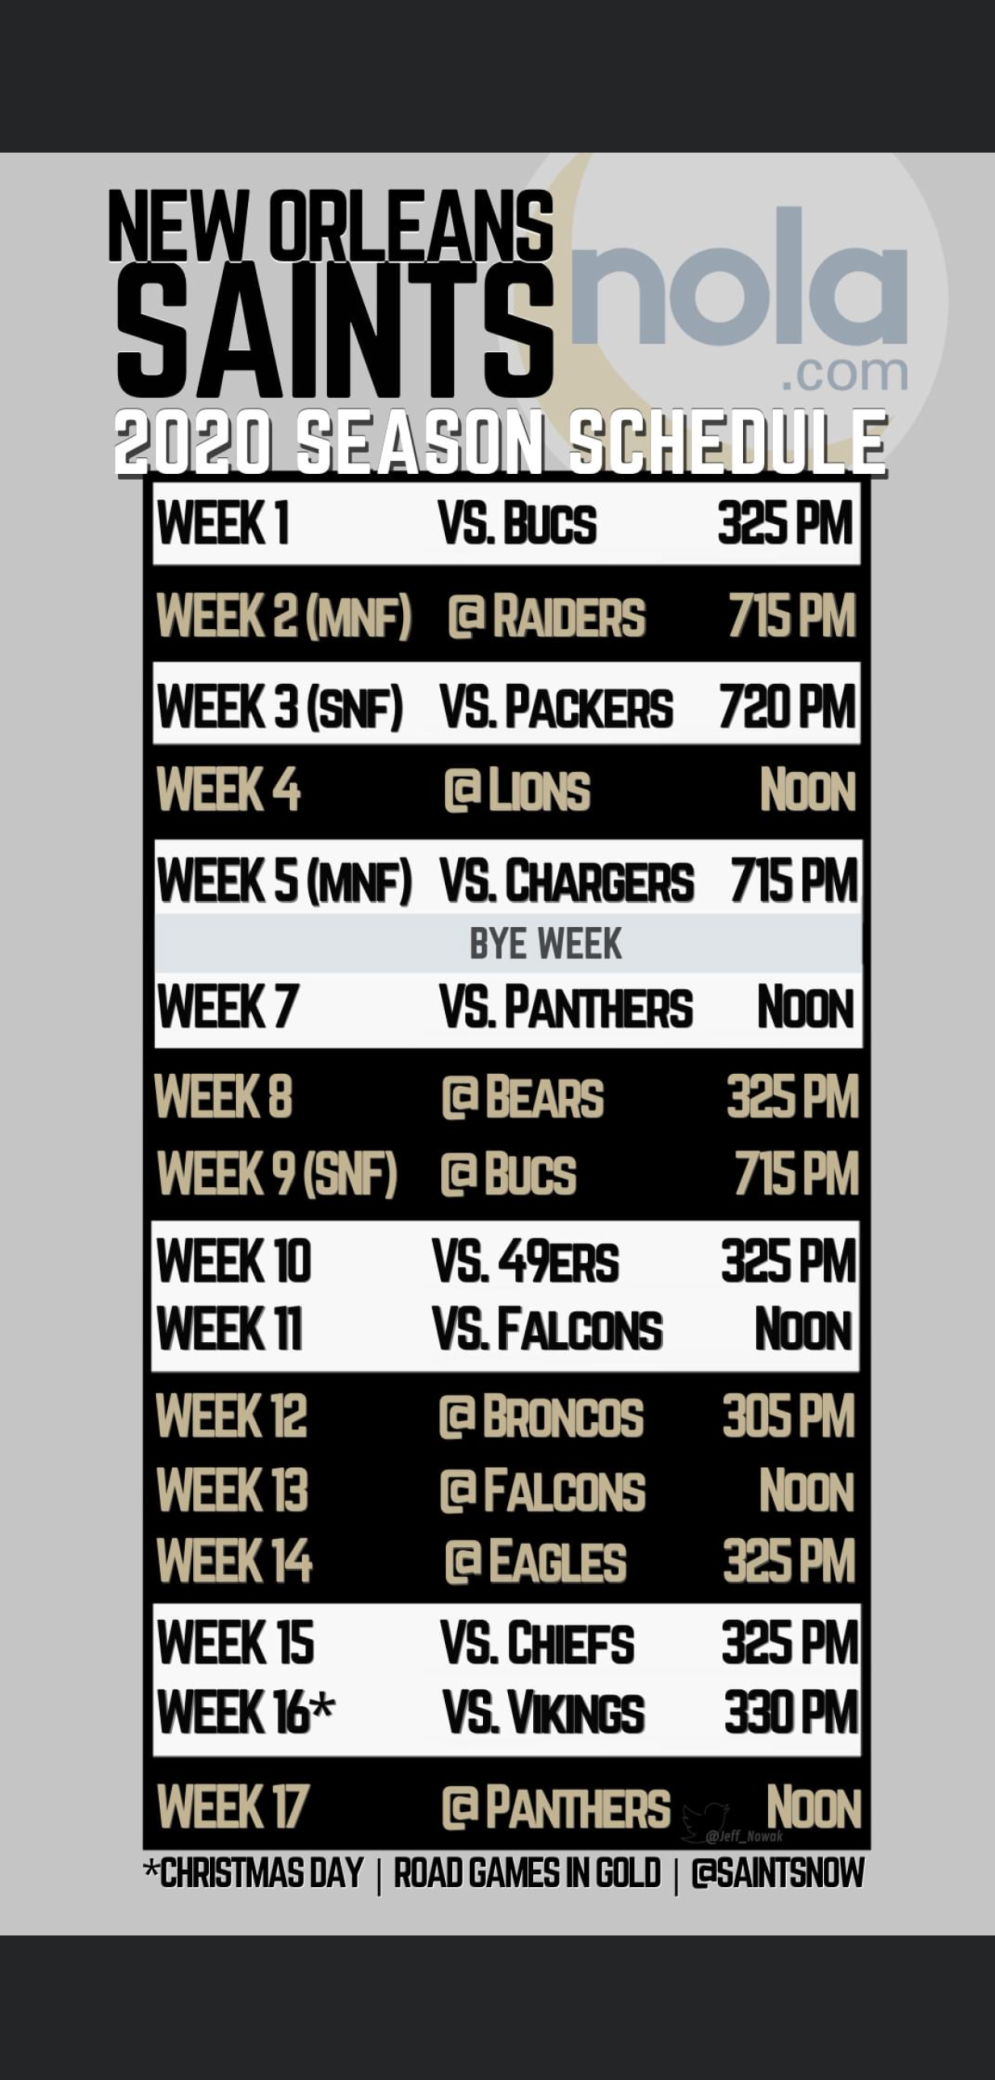 Want Saints 2020 schedule as your phone wallpaper? Click here for image